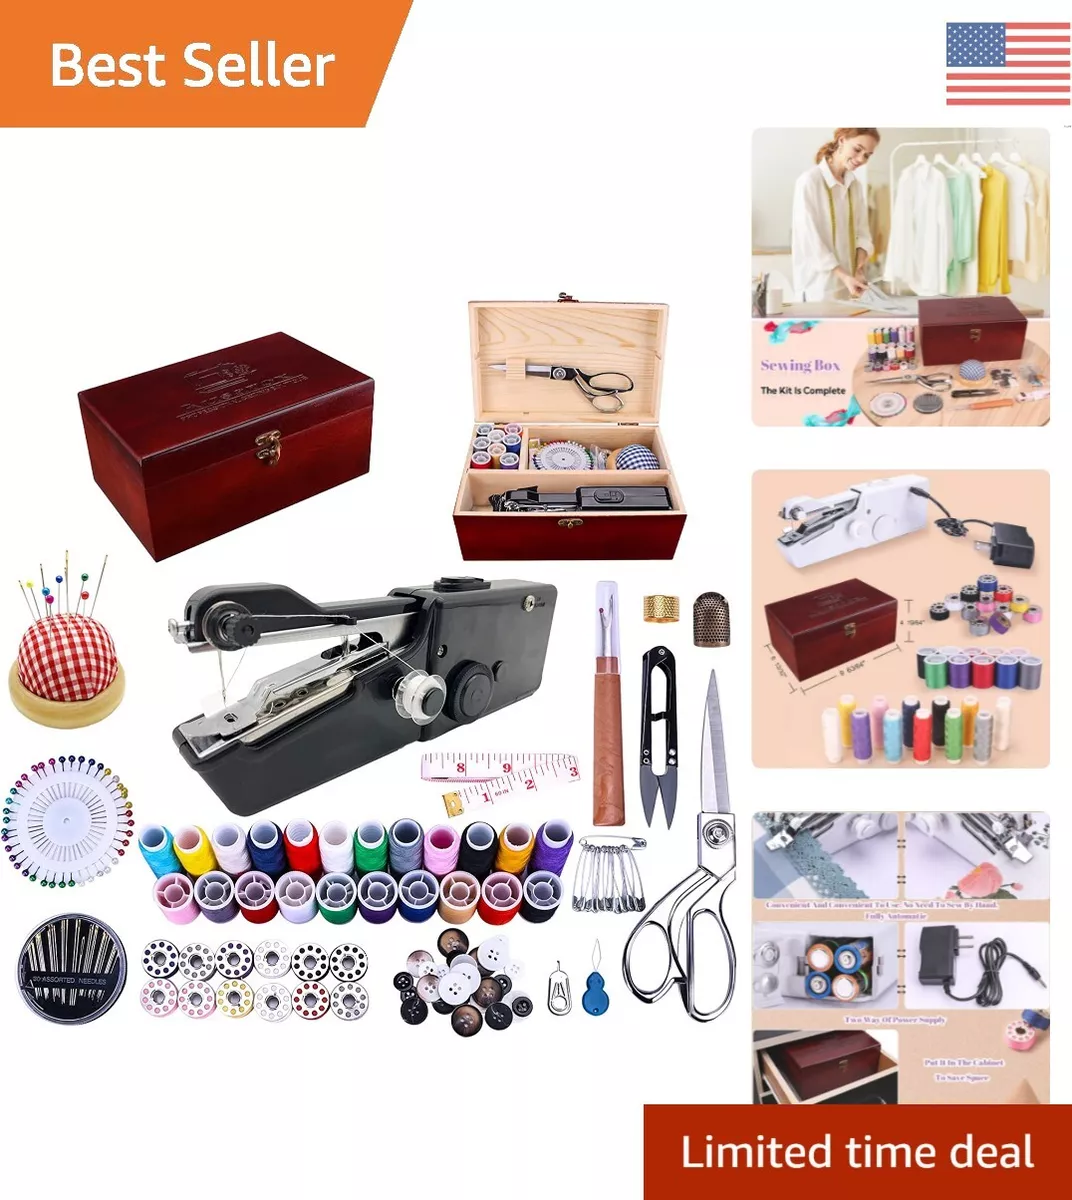 BRIGHTLYLIT Hand Held Sewing Device, Handheld Sewing Machine Heavy Duty, Hand Sewing Machine Portable, Wooden Sewing Box with 153 Pcs Sewing